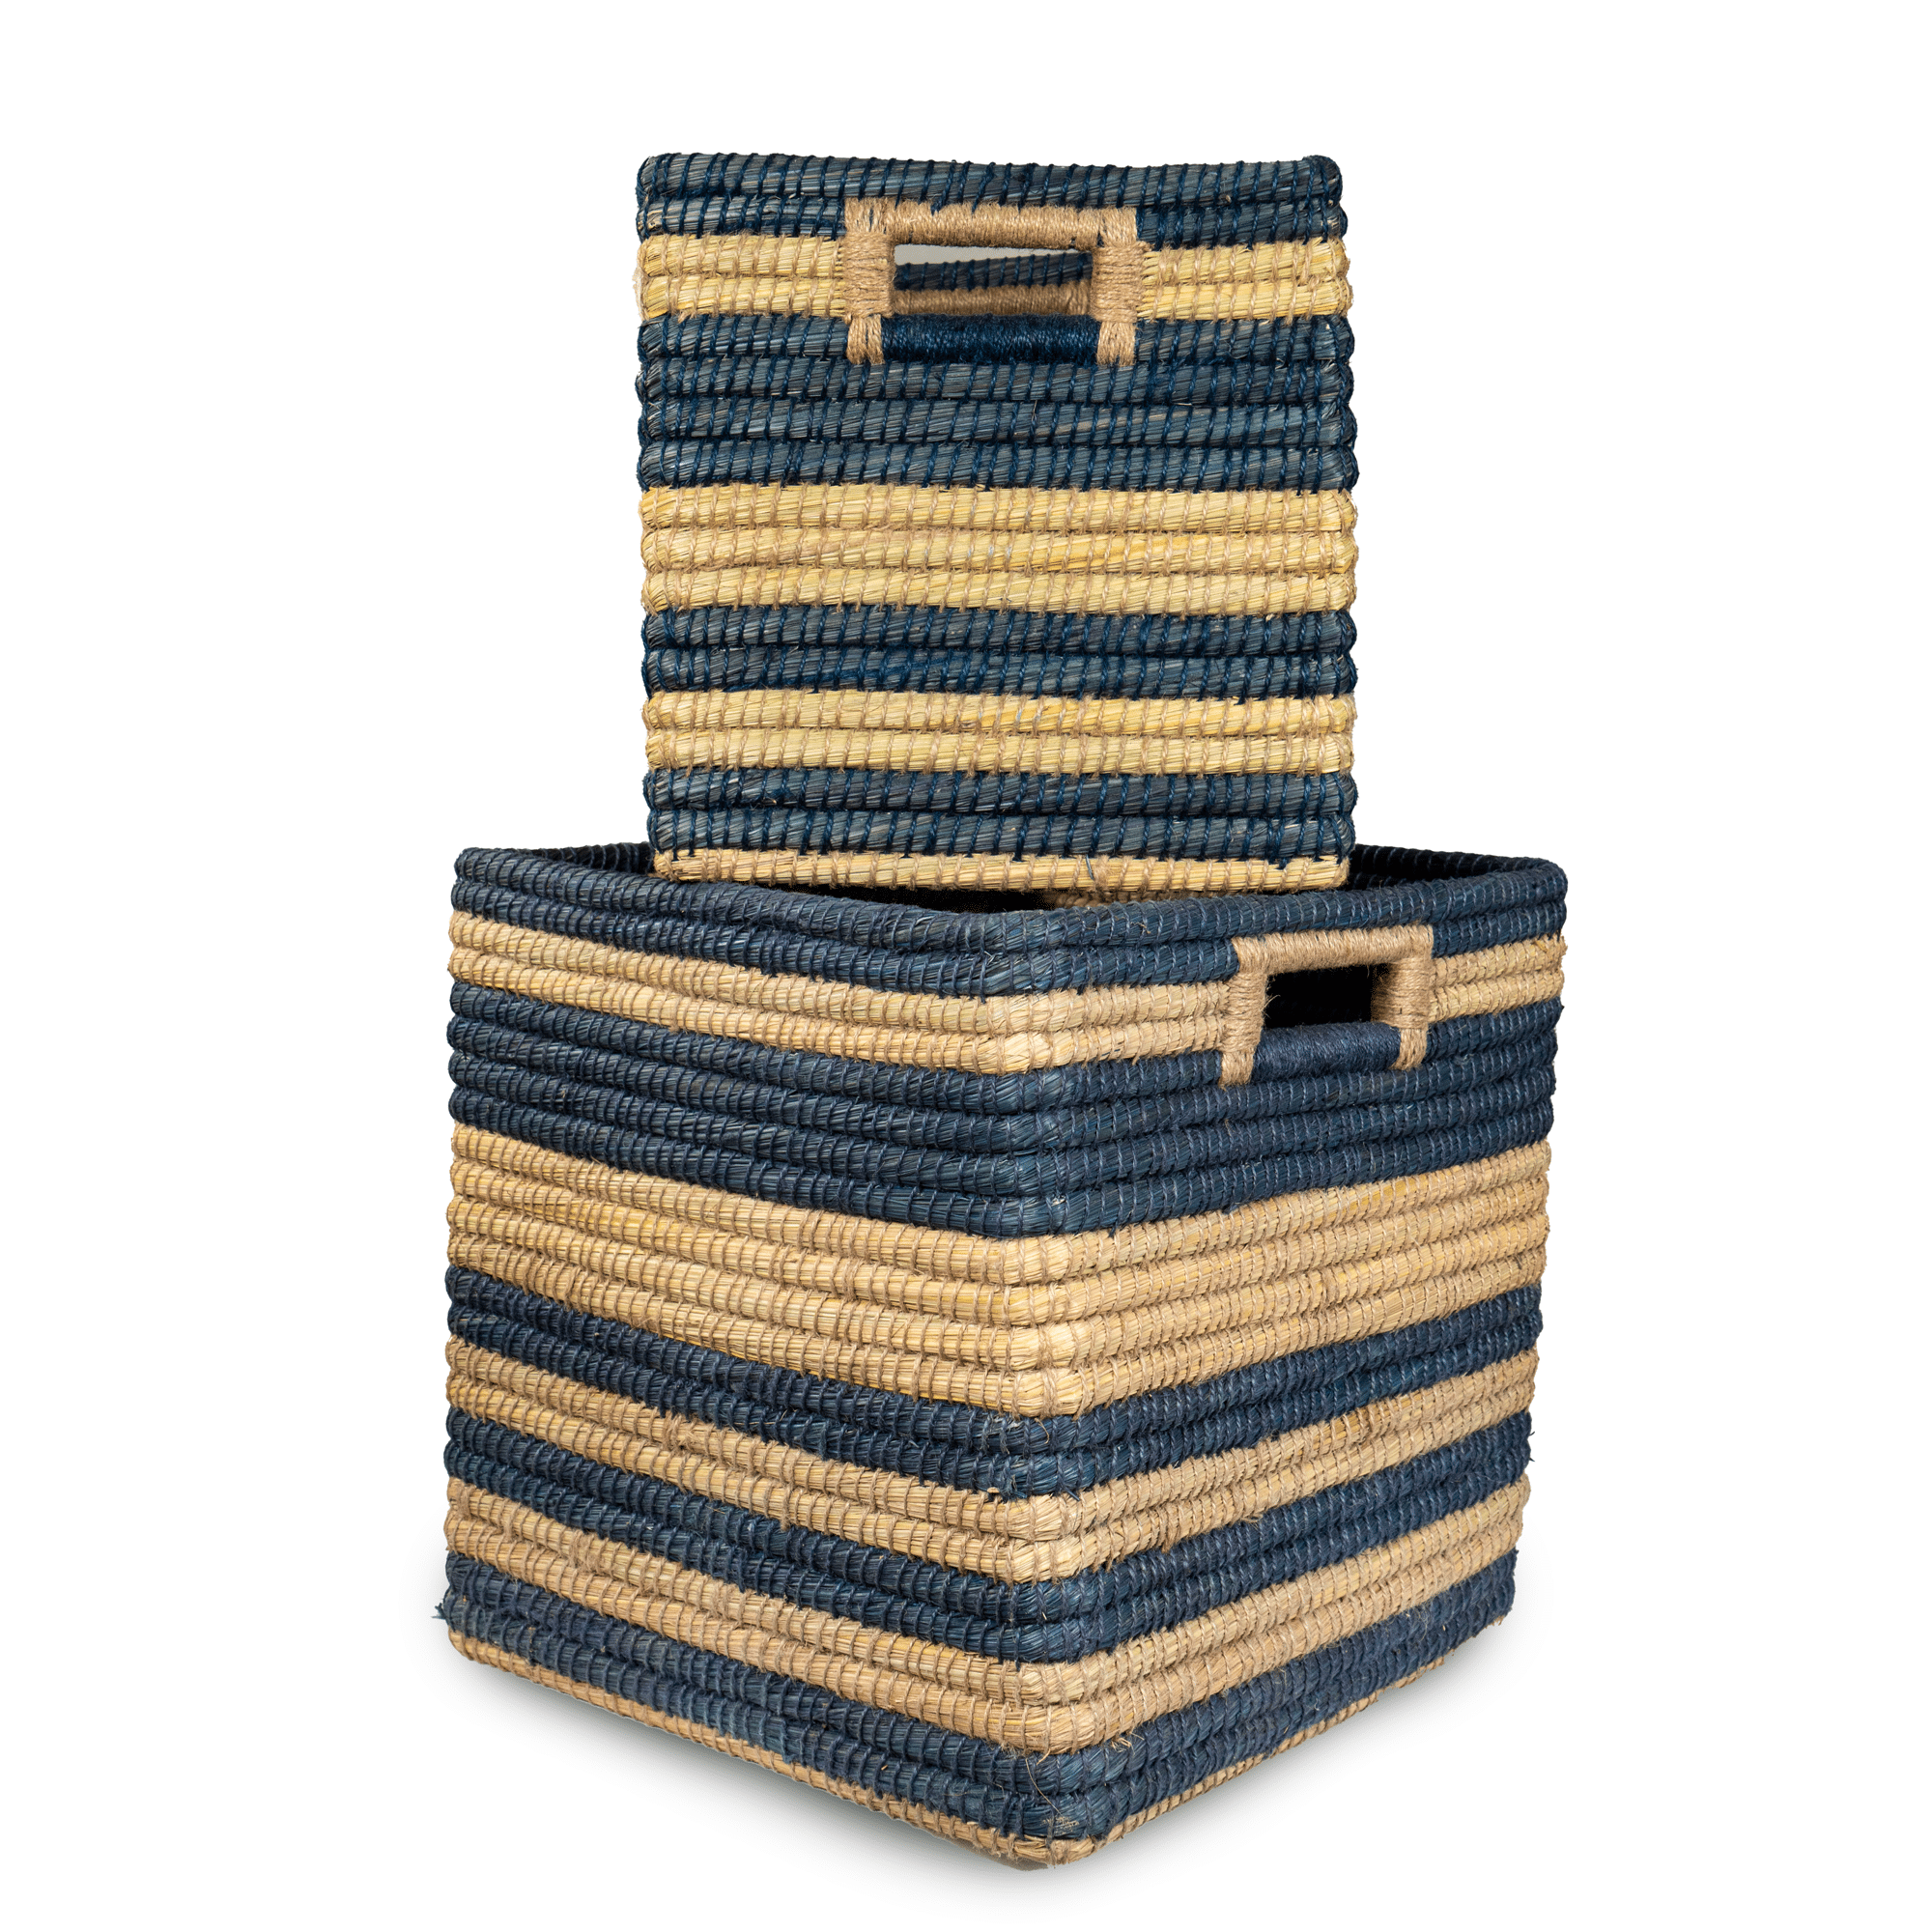 Rectangular Hand-Woven Kans Grass Storage Tray with Built-in Handles - ICKGHB15 (4)